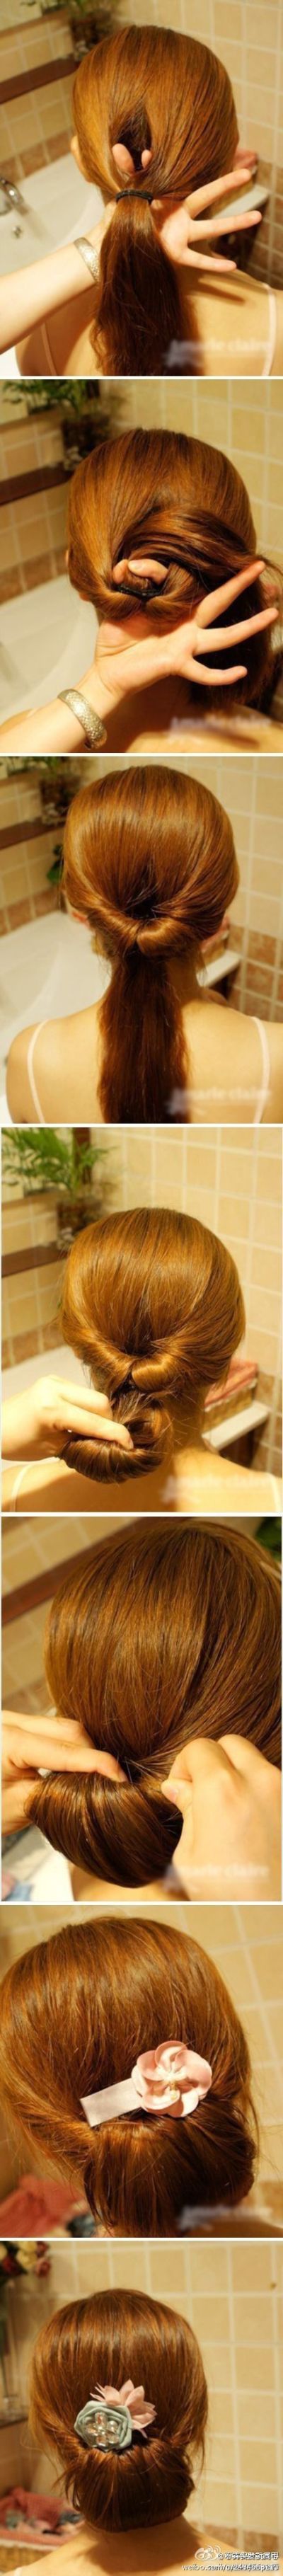 Hairstyle Tutorials (great gallery)